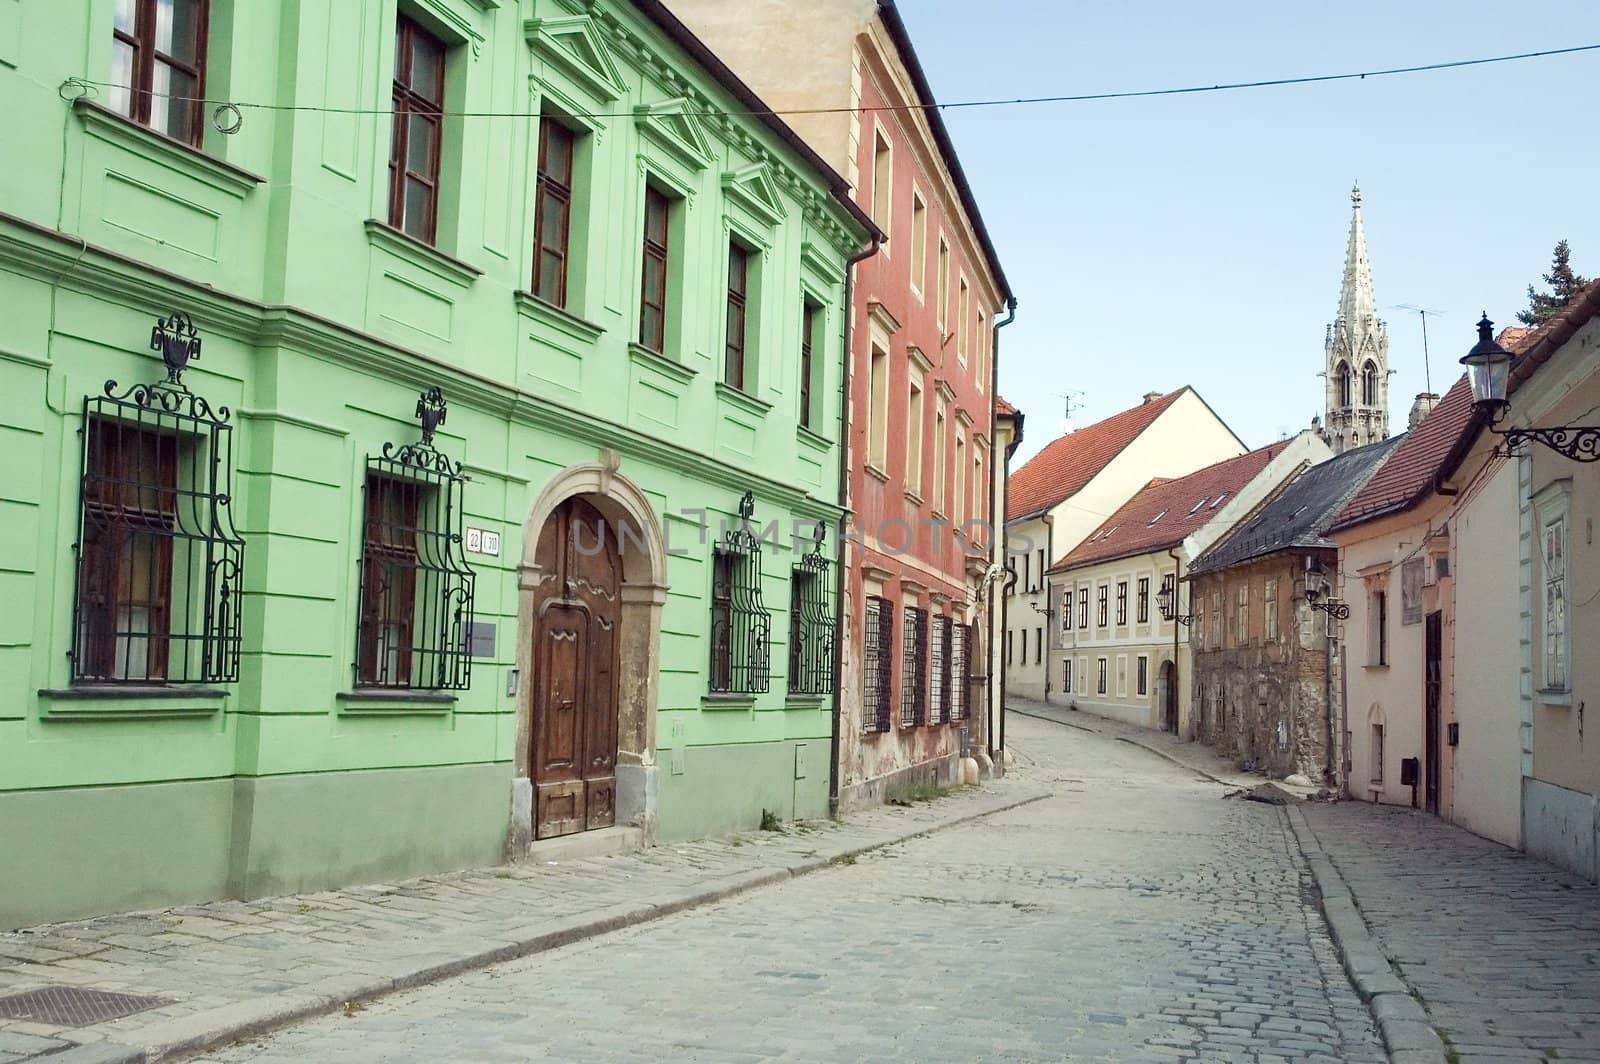 old town in bratislava - capital of slovakia, historic buildings, typical street